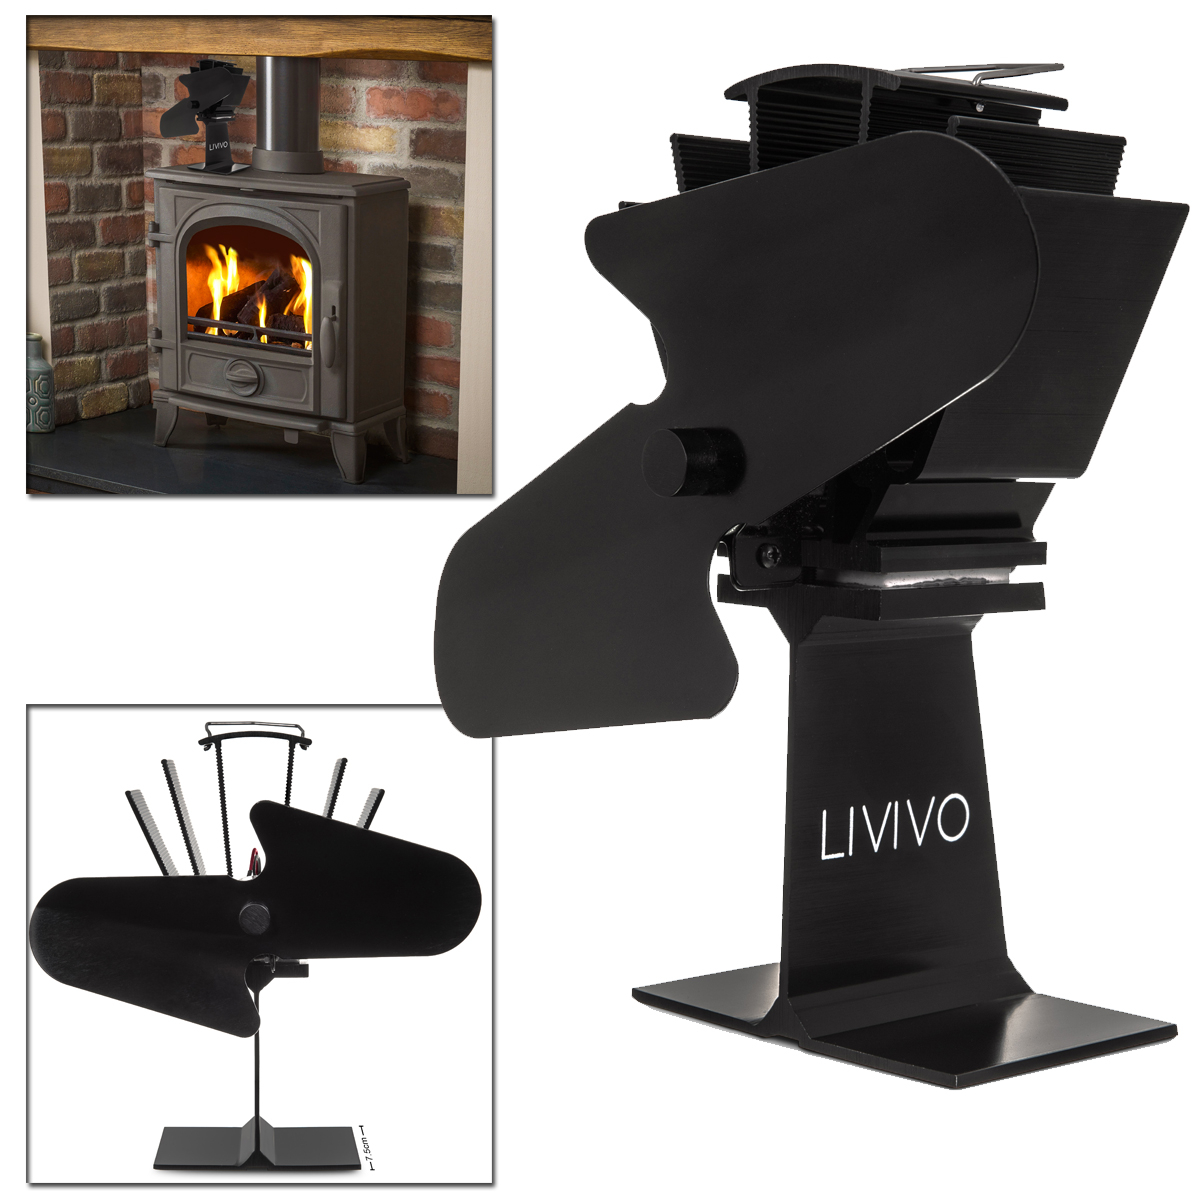 Details About 2 Blades Heat Powered Stove Top Fan Wood Log Burner Fireplace Eco Friendly Uk in dimensions 1200 X 1200